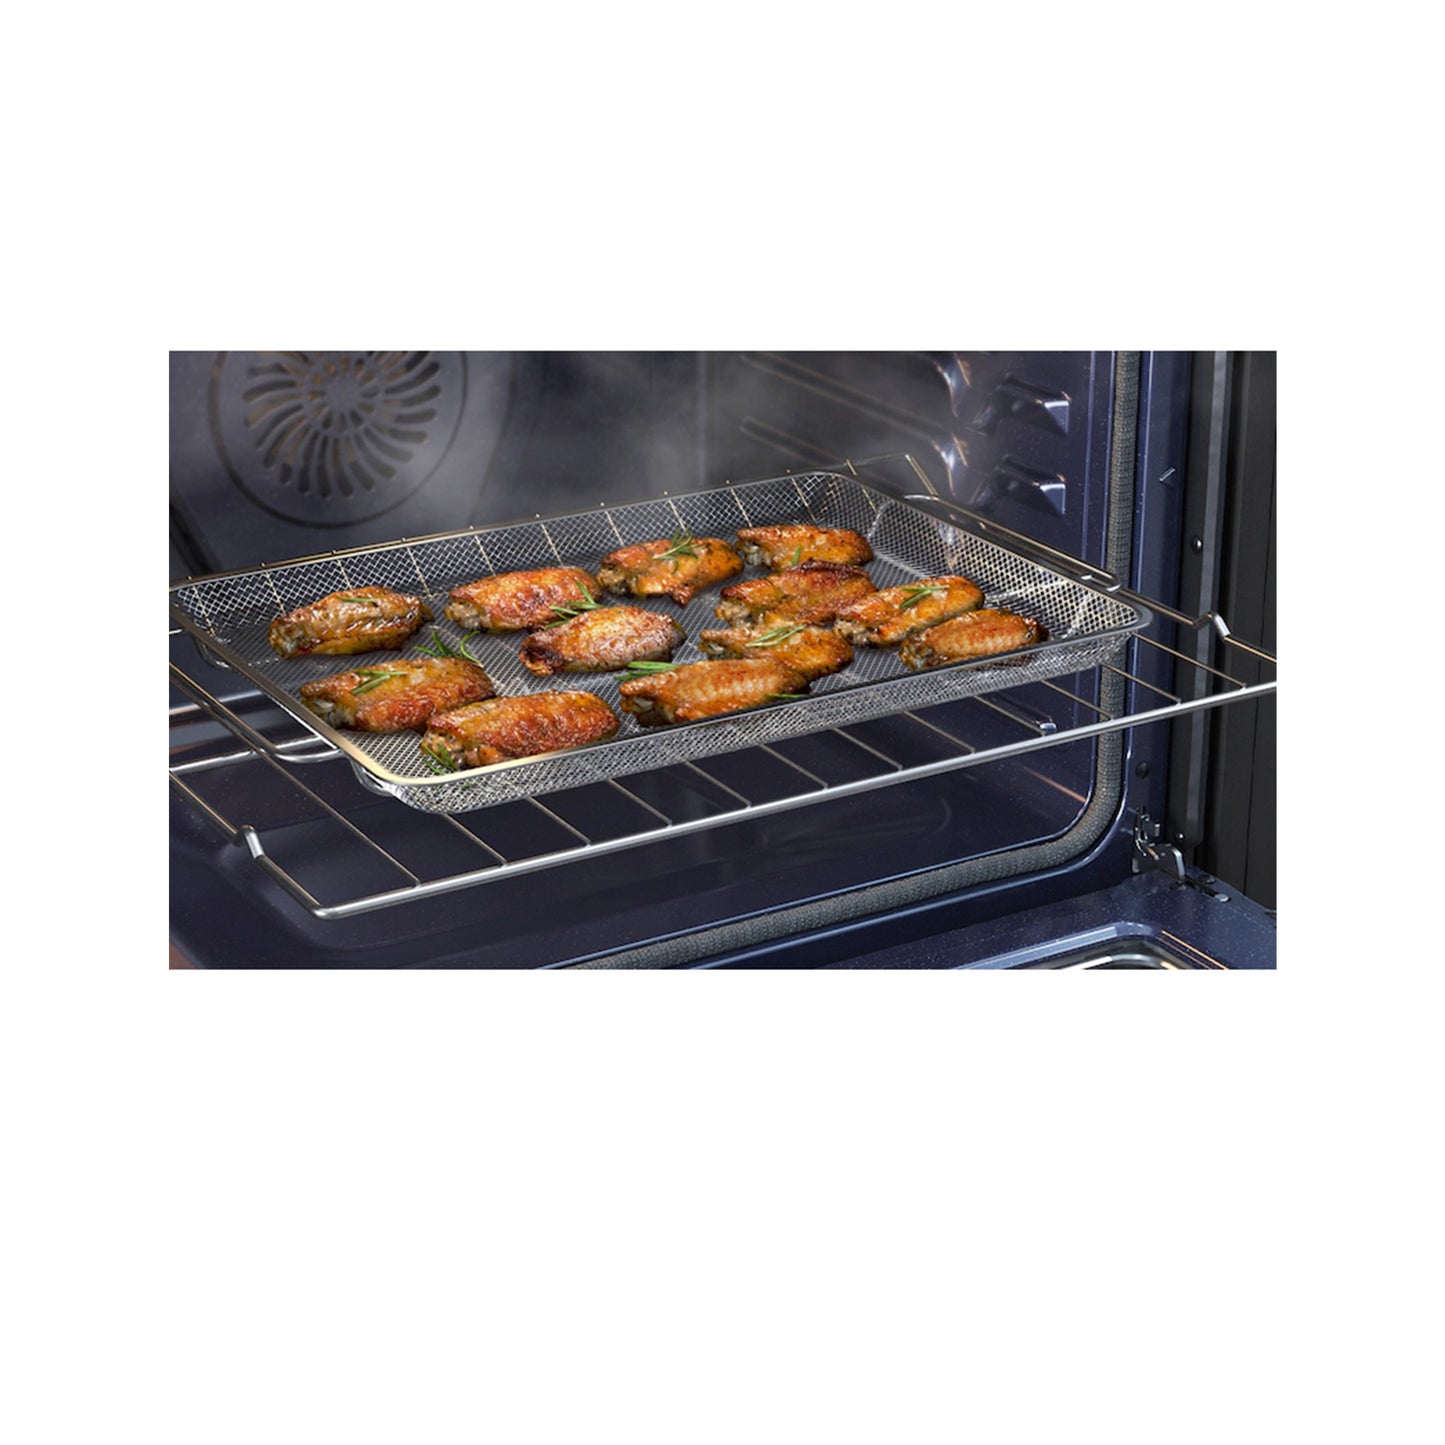 Stainless Steel Air Fry Tray Accessory for 30” Ranges